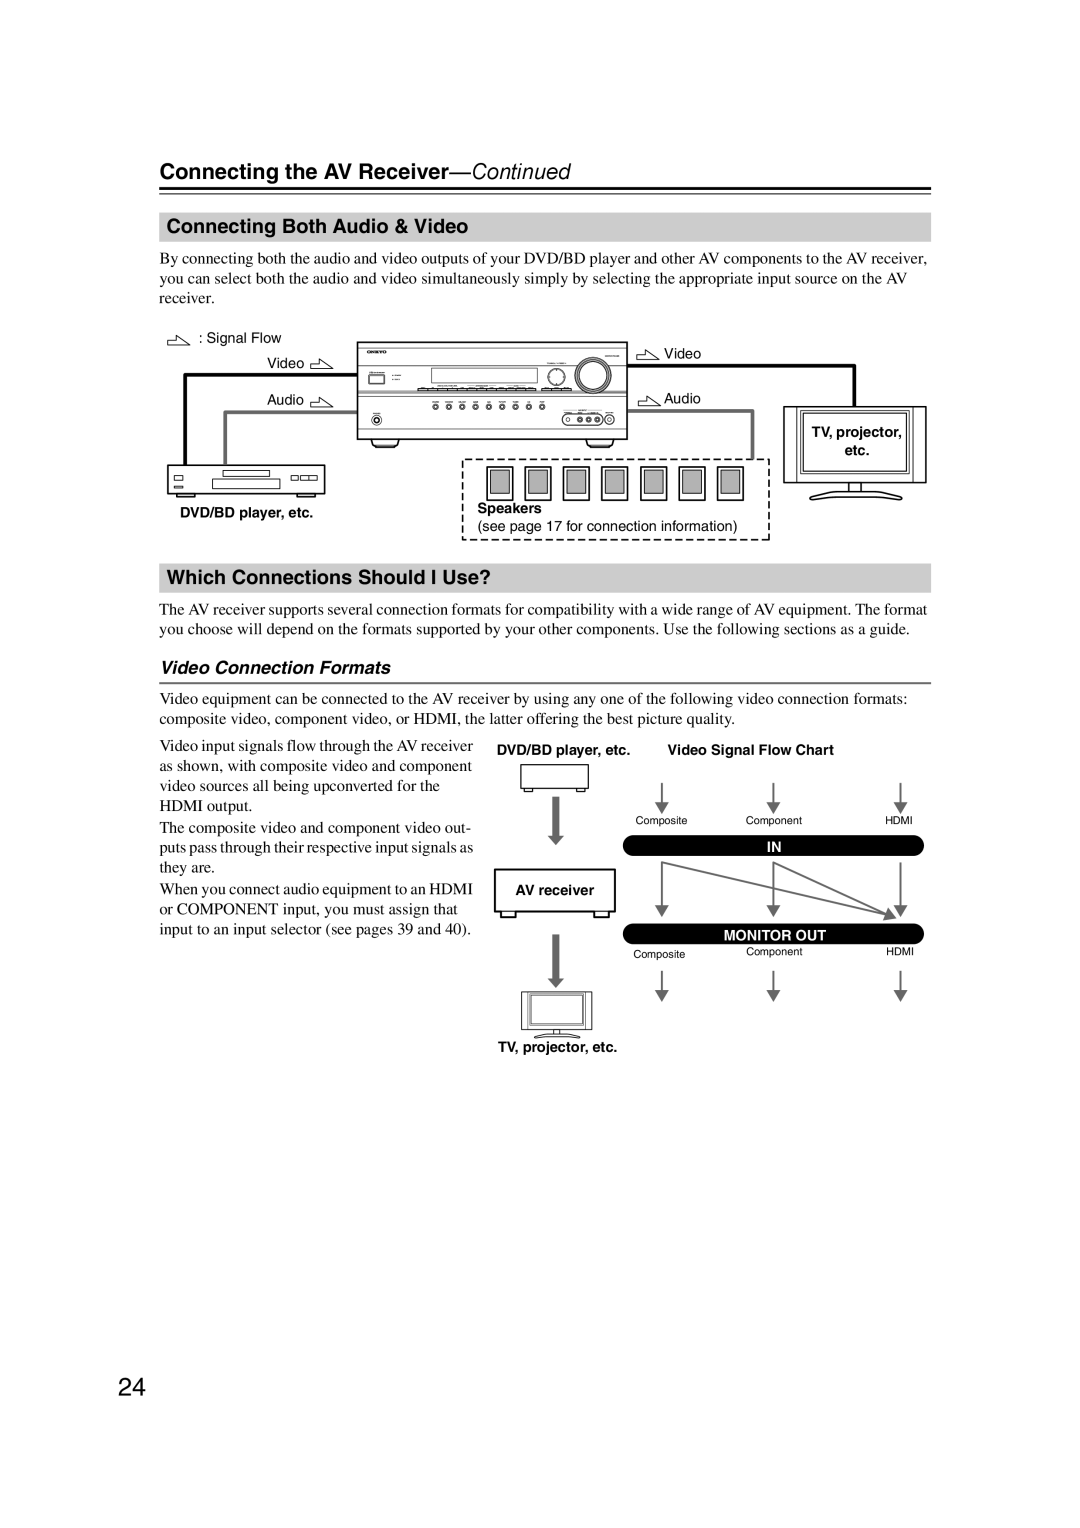 Onkyo HT-RC160 instruction manual Connecting Both Audio & Video, Which Connections Should I Use?, Video Connection Formats 